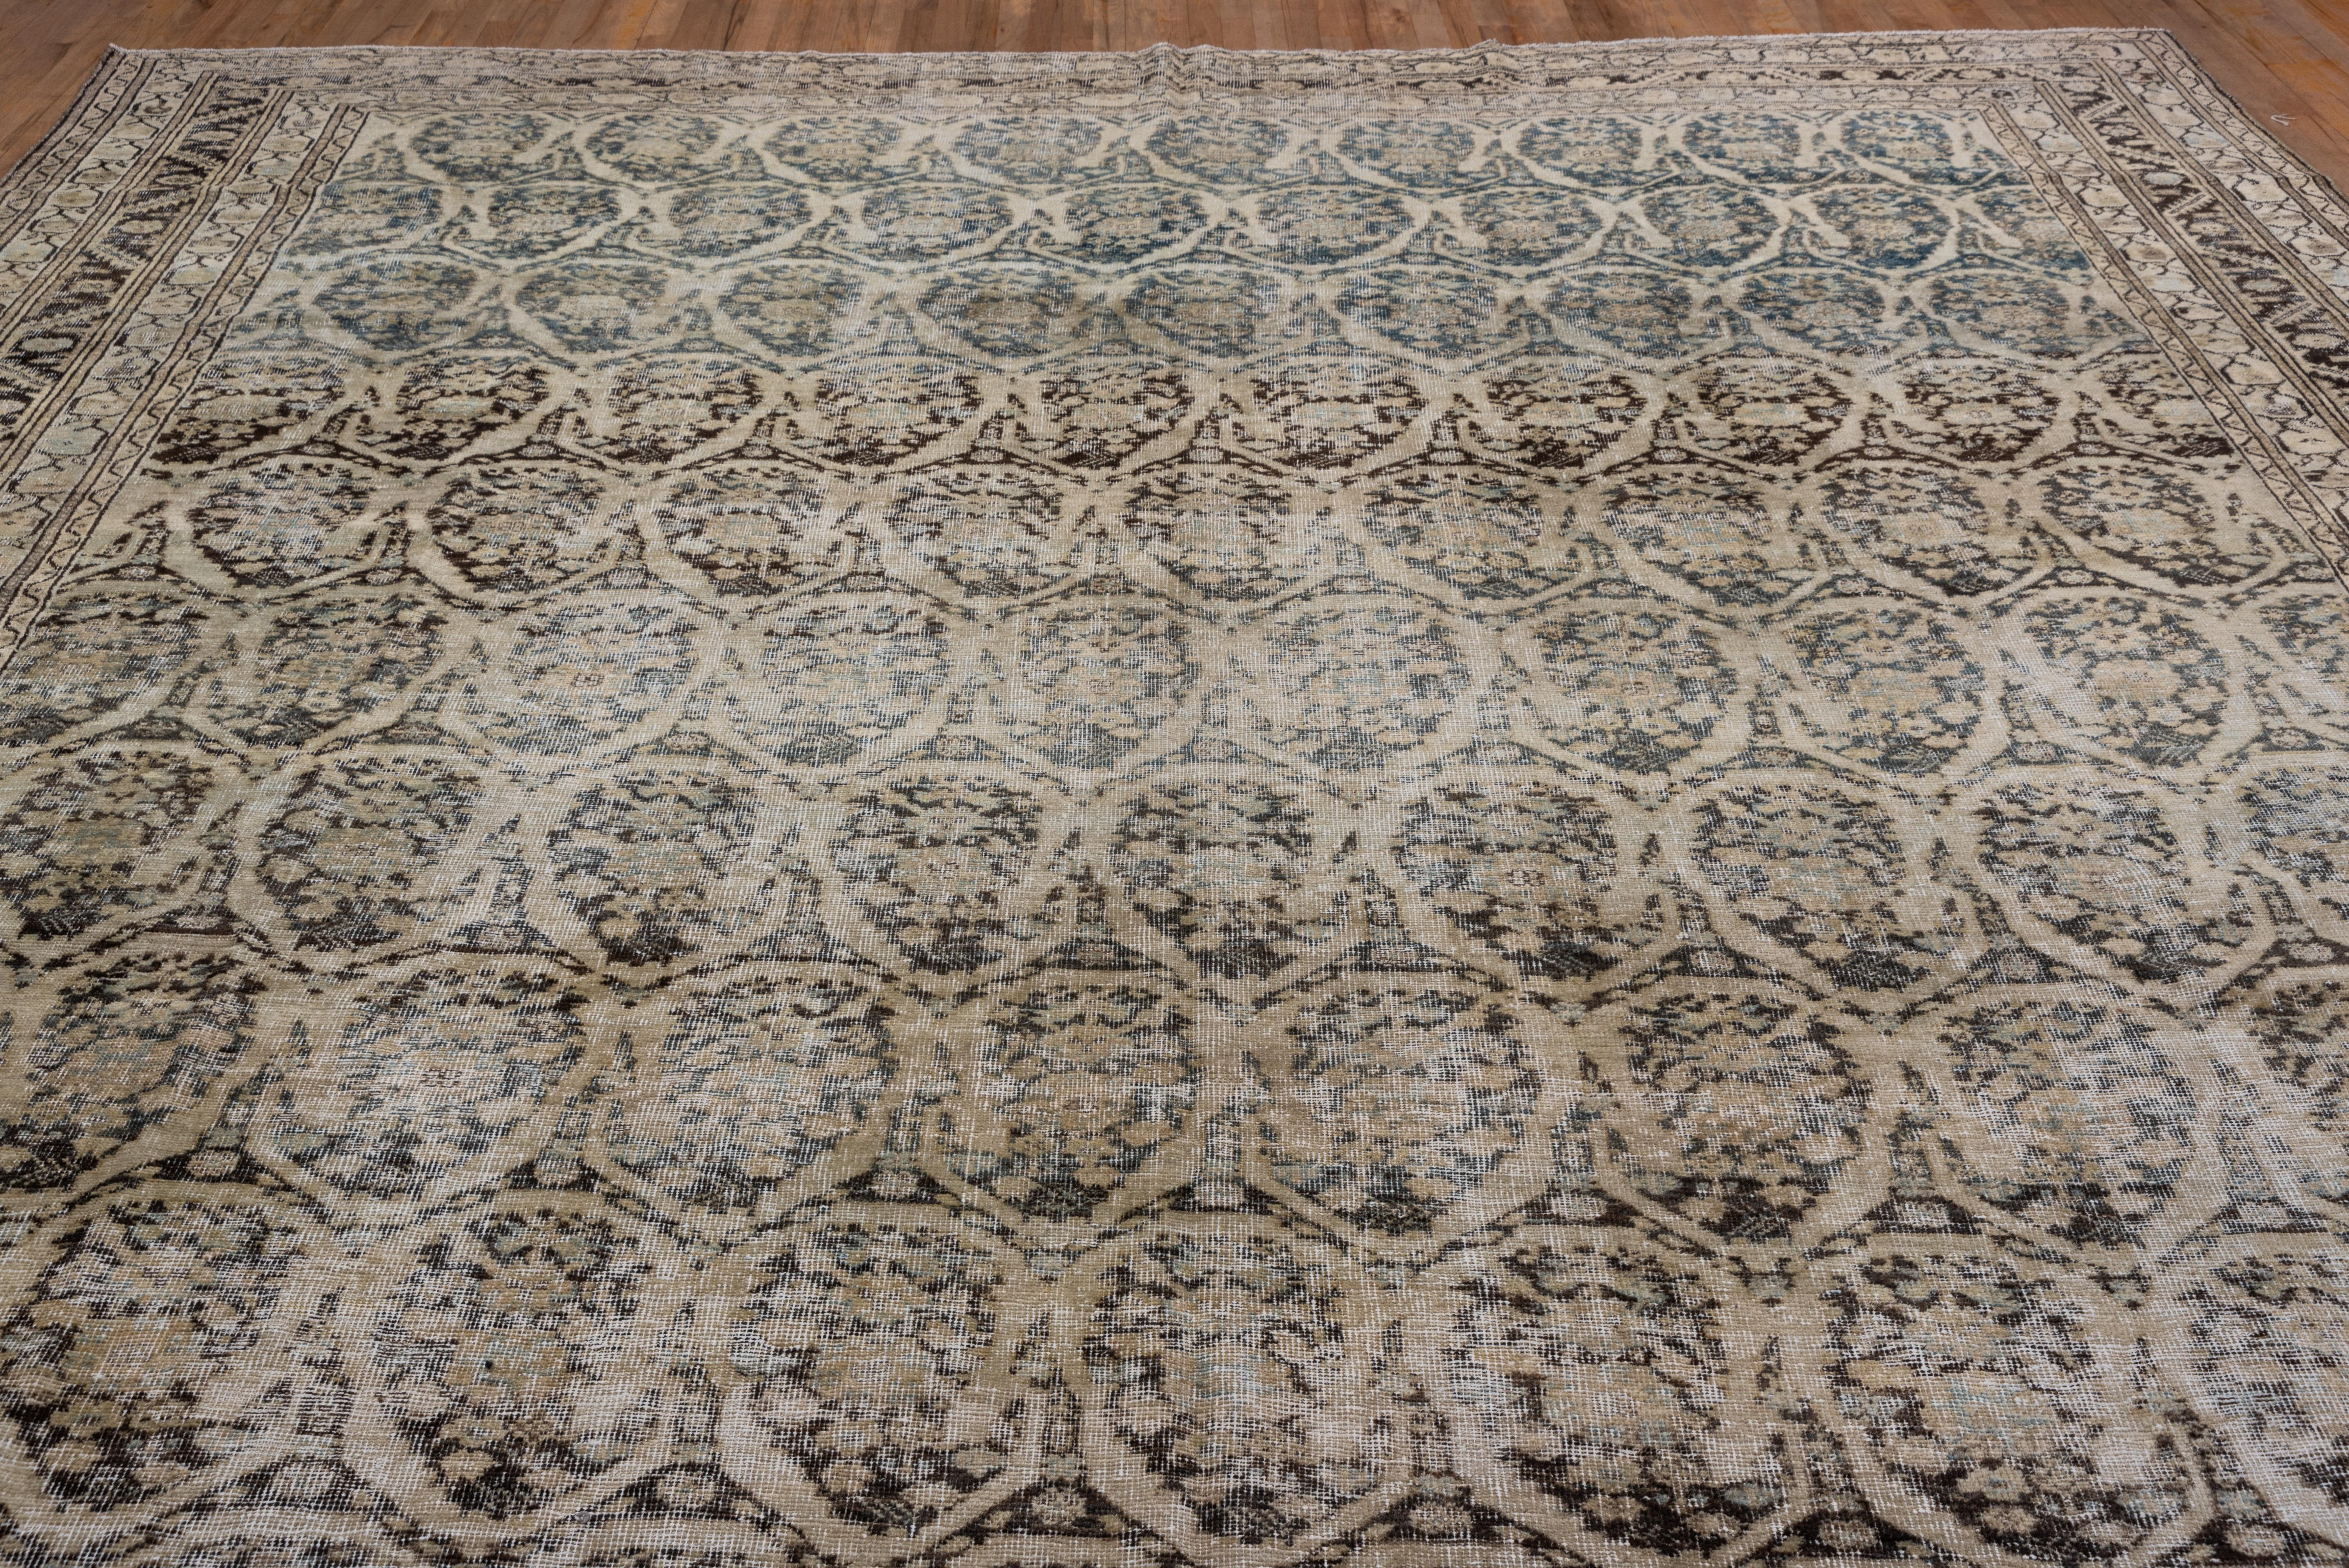 Hand-Knotted Evenly Worn Antique Persian Mahal Mansion Kellegi Rug, Earth Tones, circa 1910s